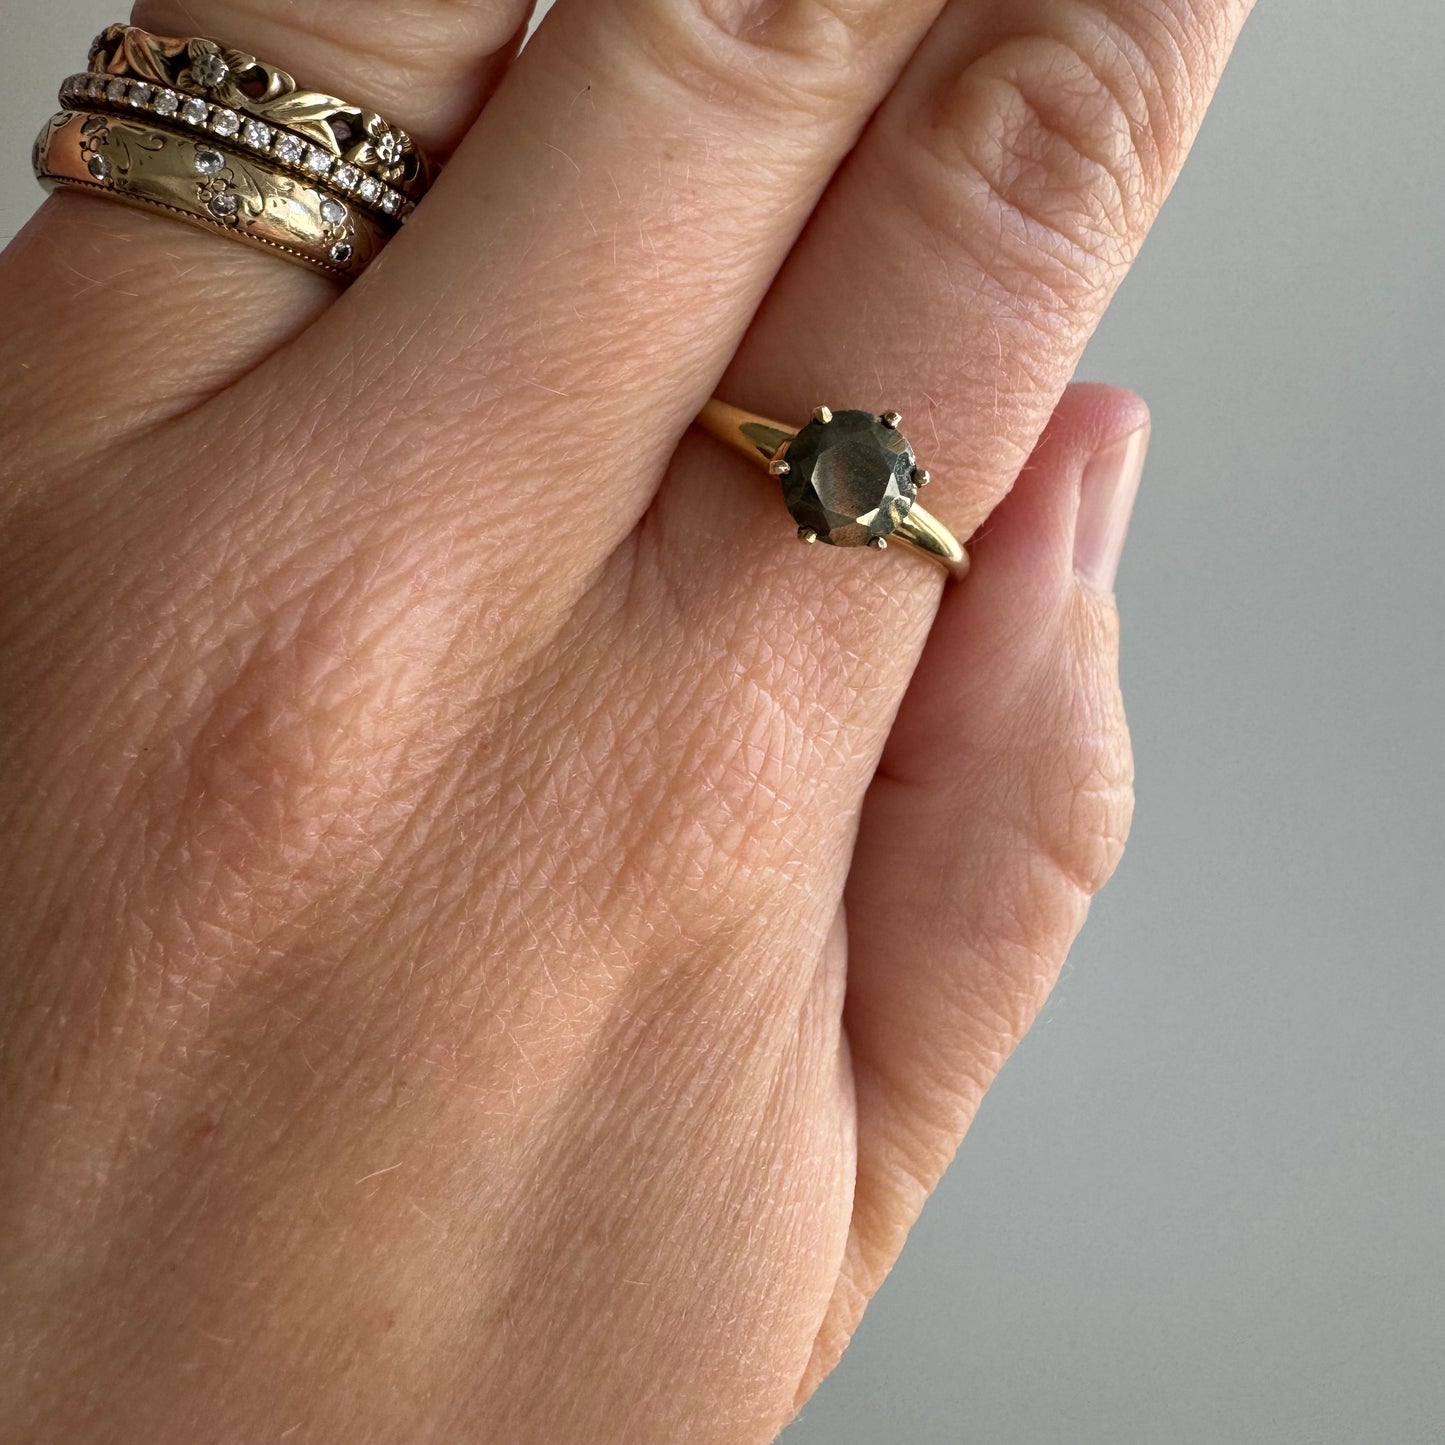 reimagined V I N T A G E // foolish solitaire / 10k and pyrite solitaire stacking ring / size 8 to 8.25